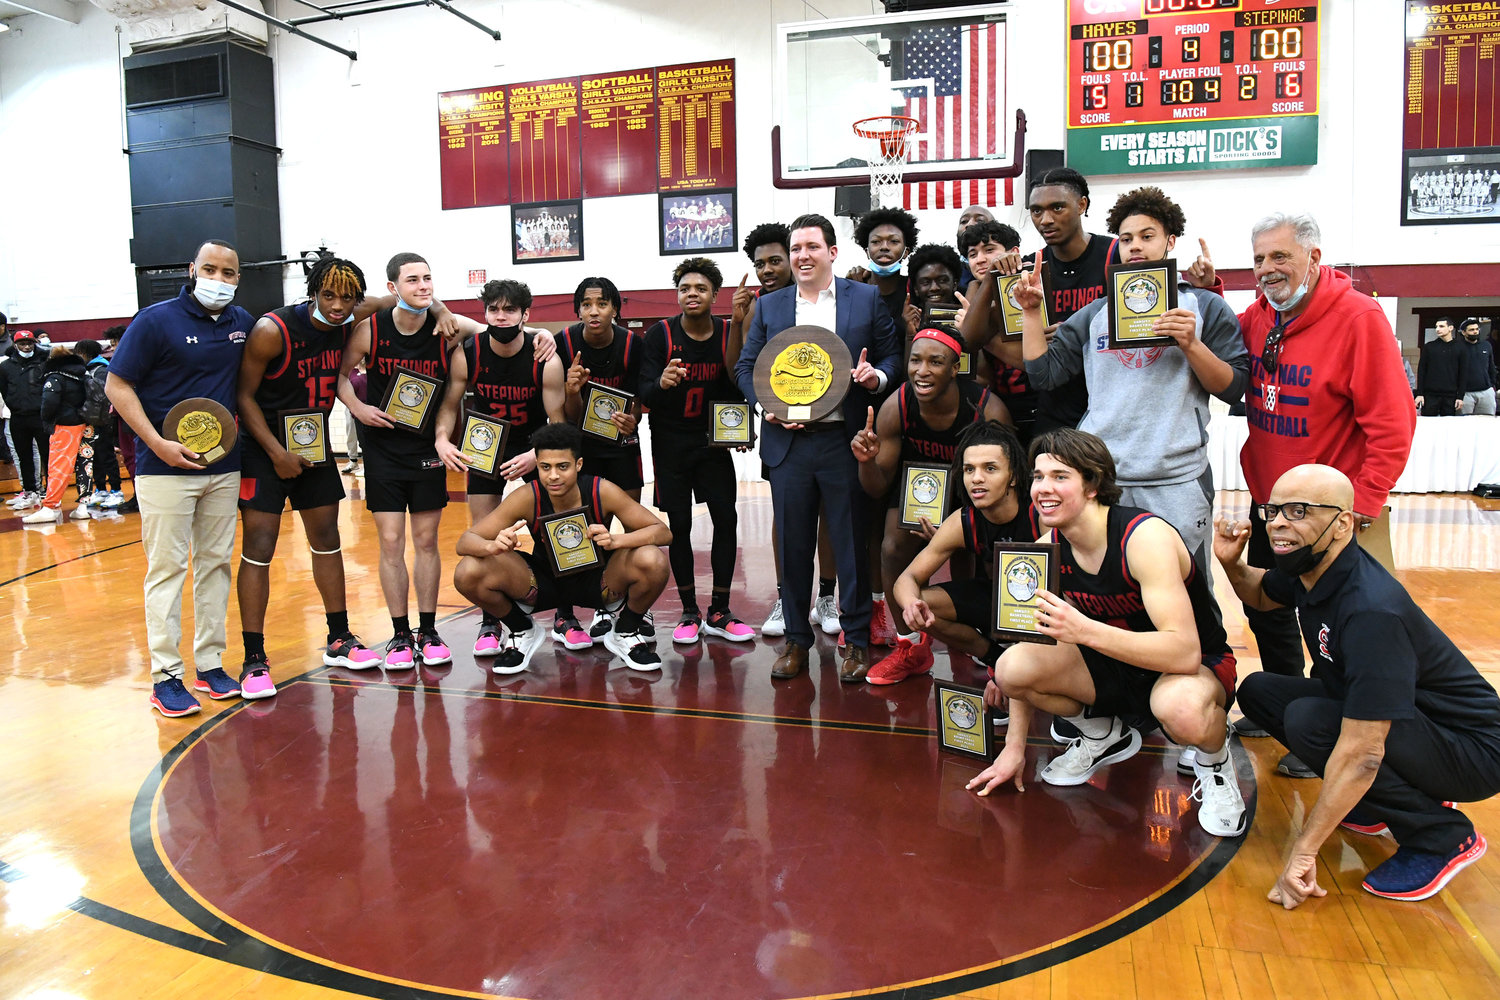 Archbishop Stepinac High School boys’ basketball players and coaches hold their championship plaques following a 51-40 victory over Cardinal Hayes in the Archdiocesan championship game.